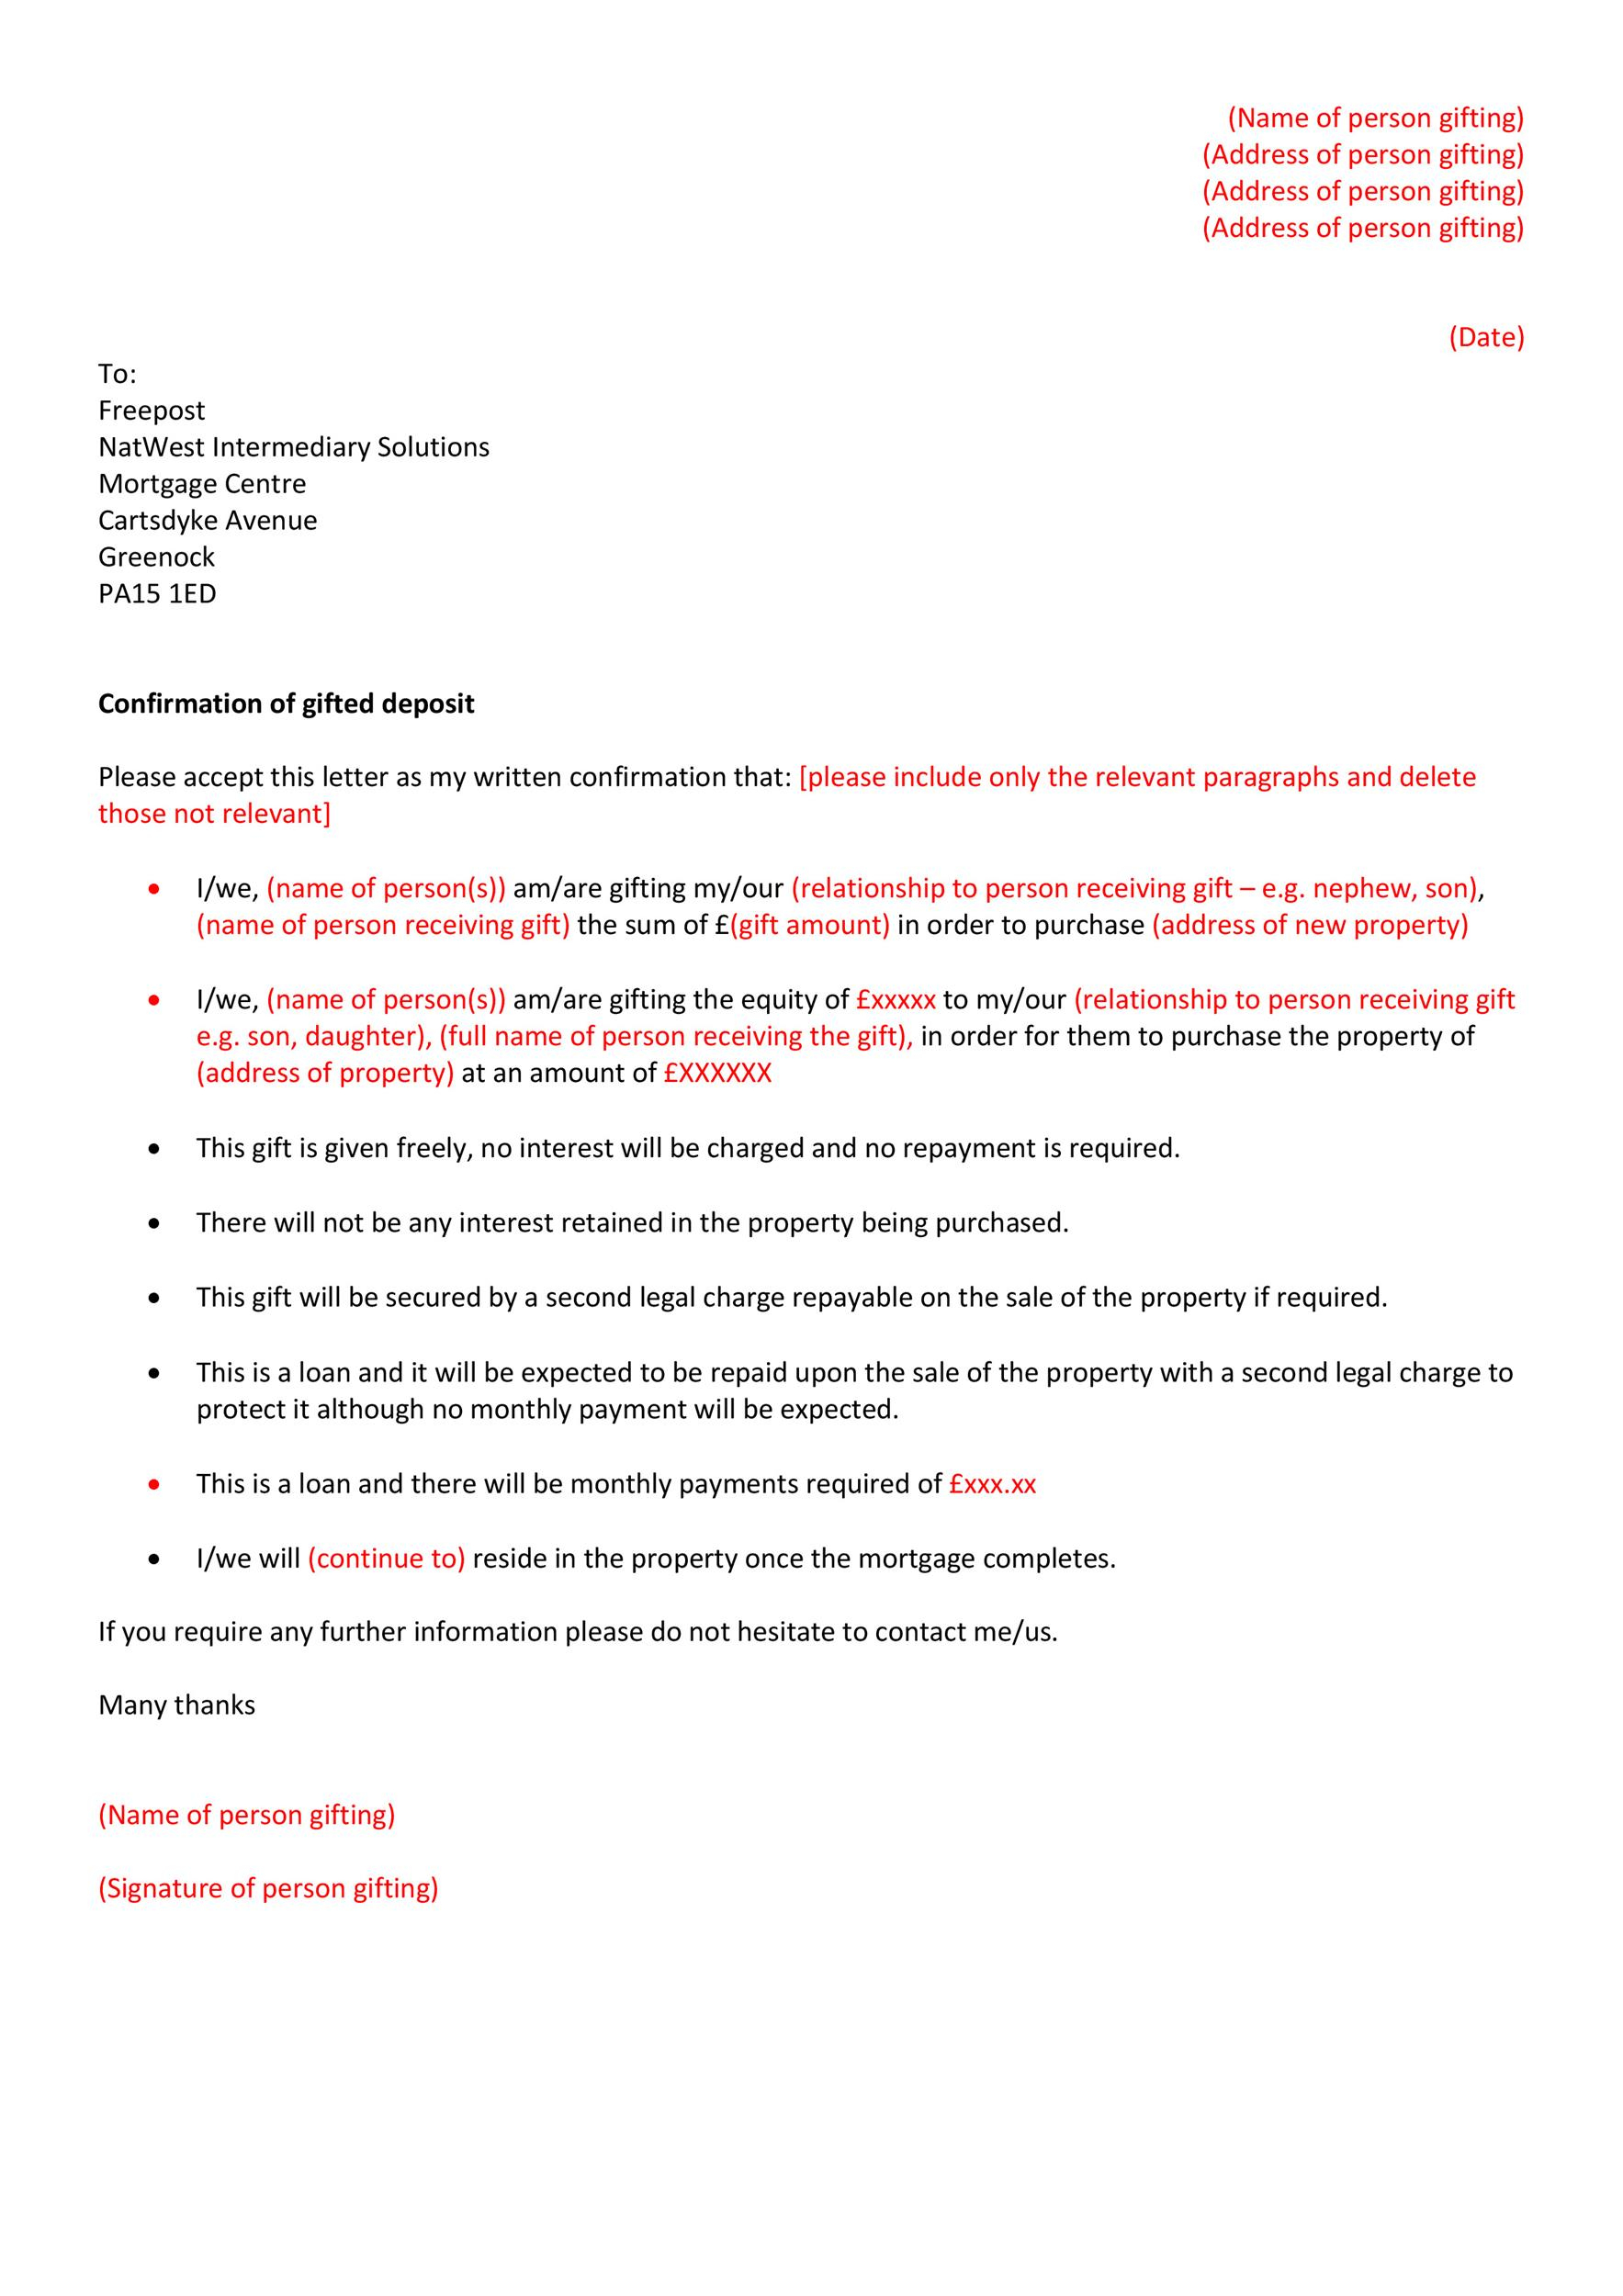 10 Best Gift Letter Templates (Word & PDF) ᐅ TemplateLab Pertaining To Gifted Deposit Letter Template For Solicitor In Gifted Deposit Letter Template For Solicitor